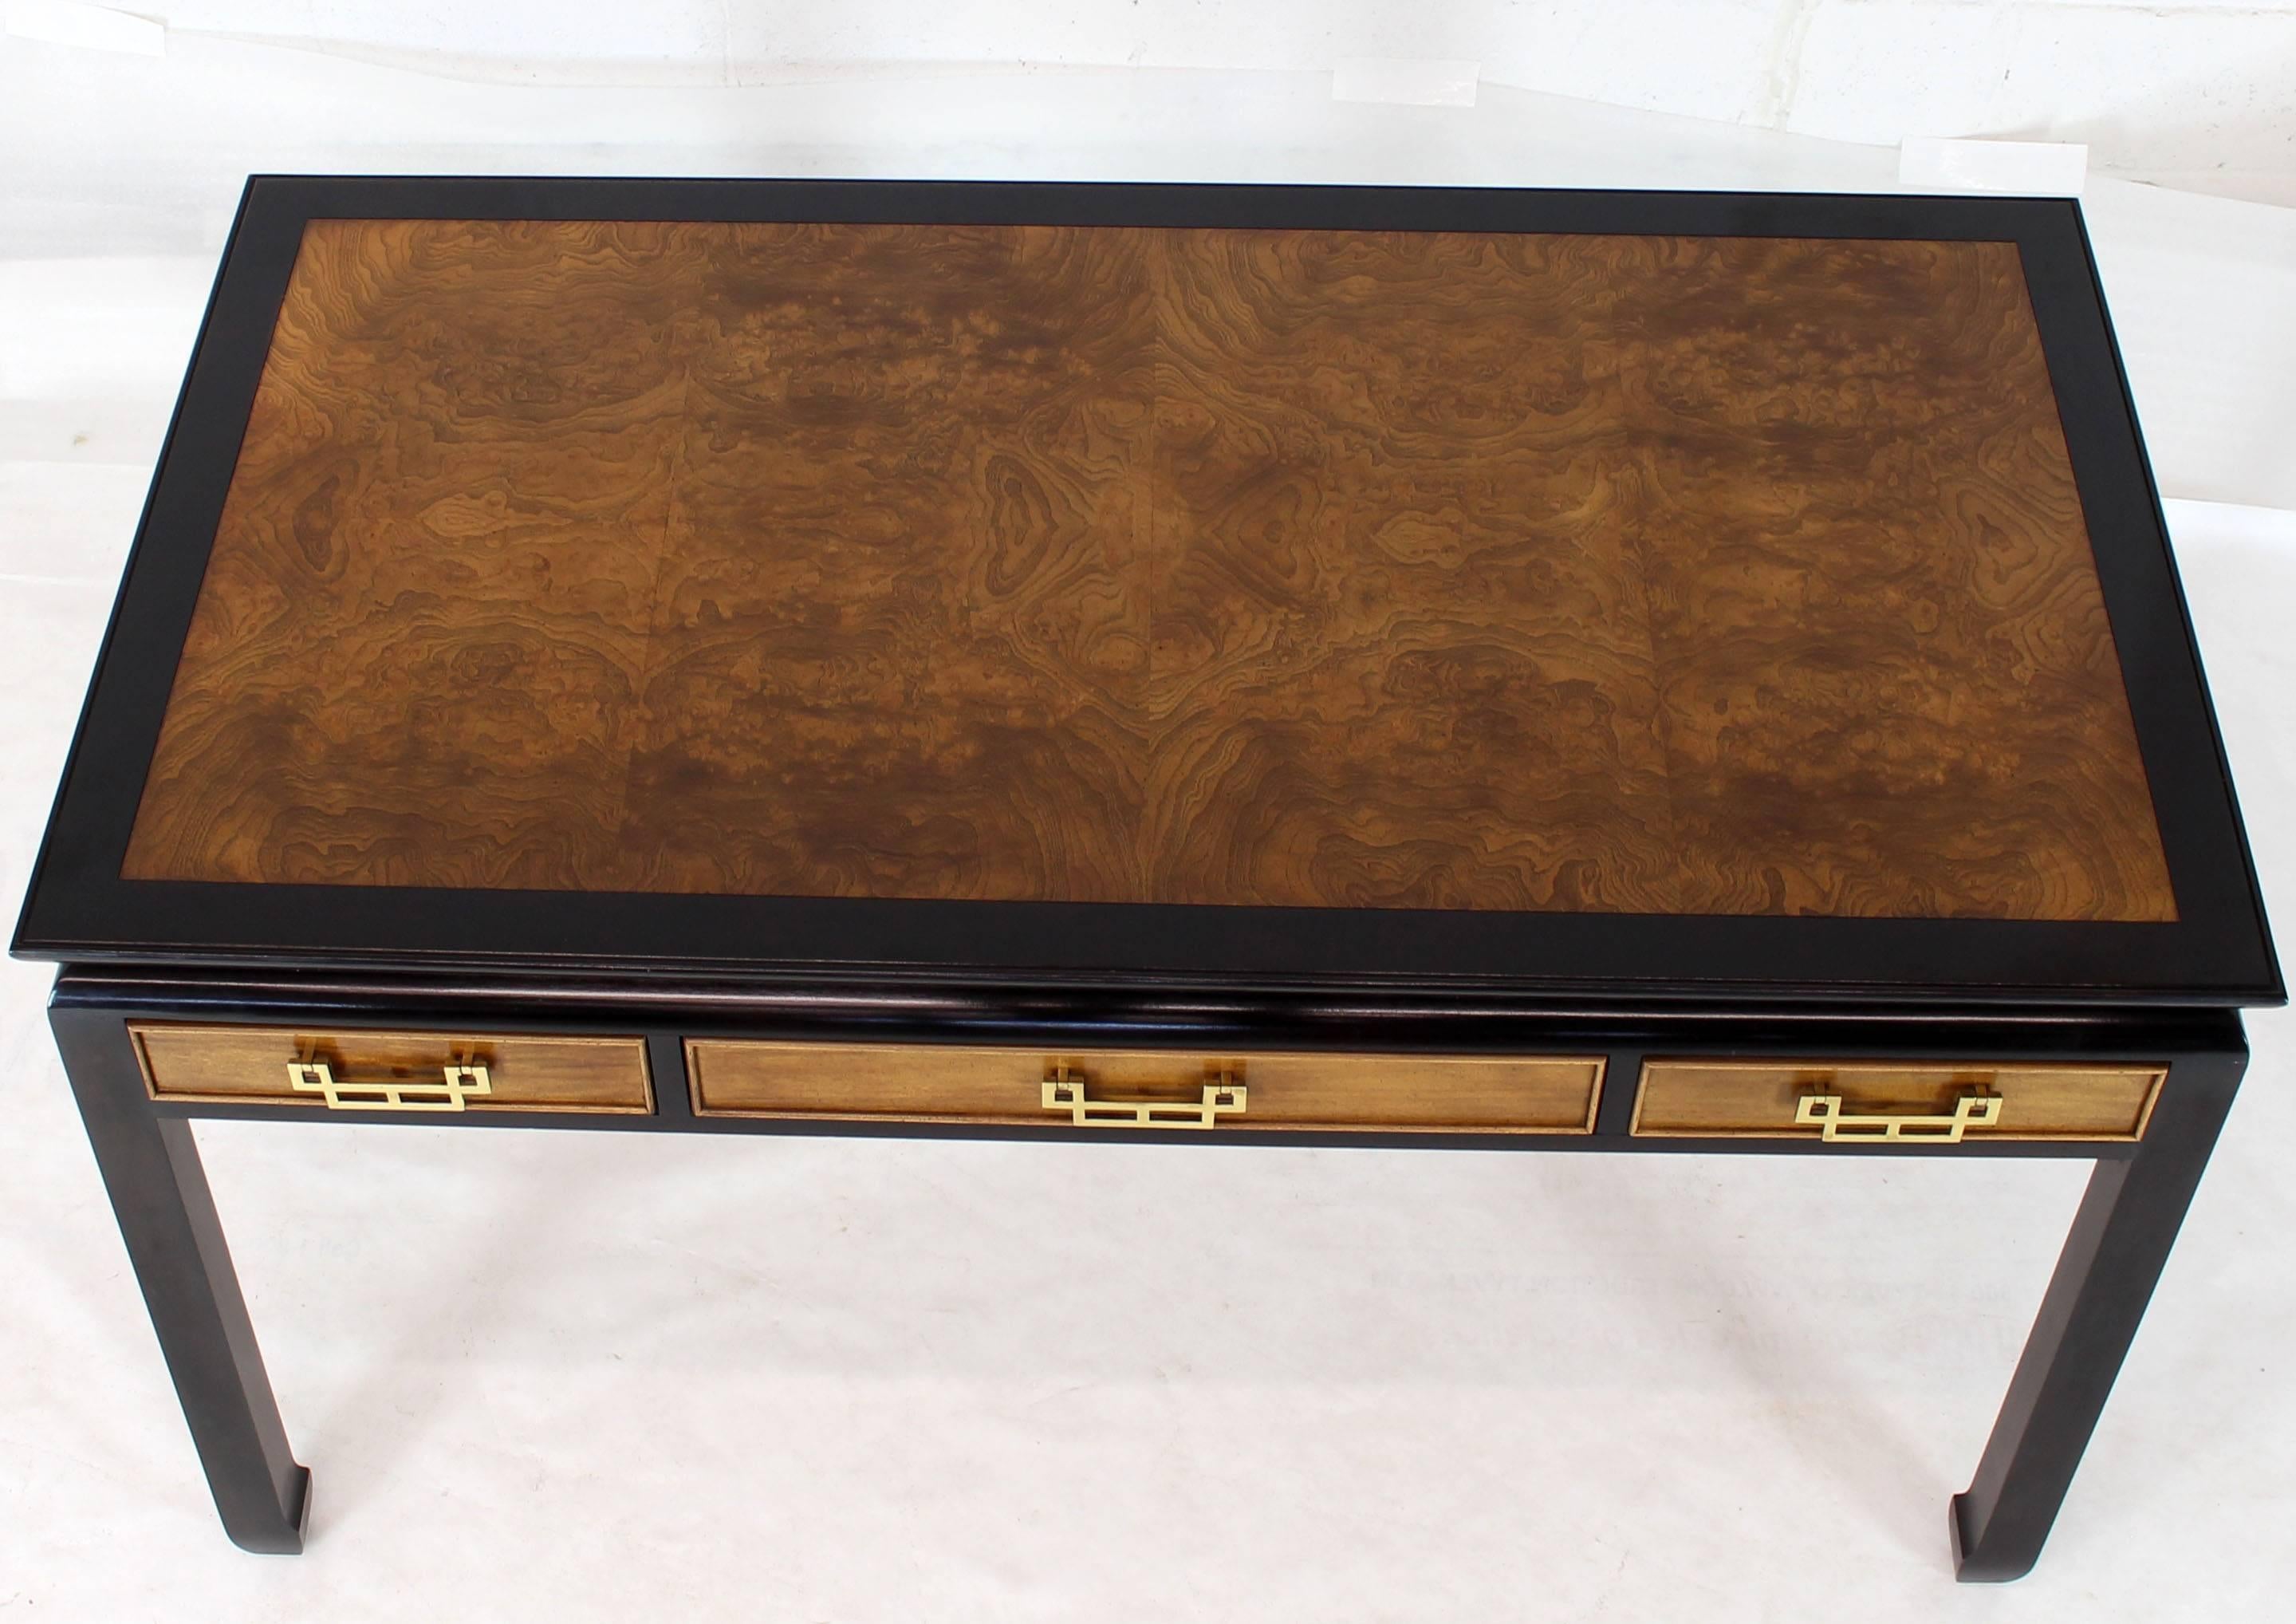 Low profile black lacquer legs burl wood top and drawers brass pulls desk or writing table.